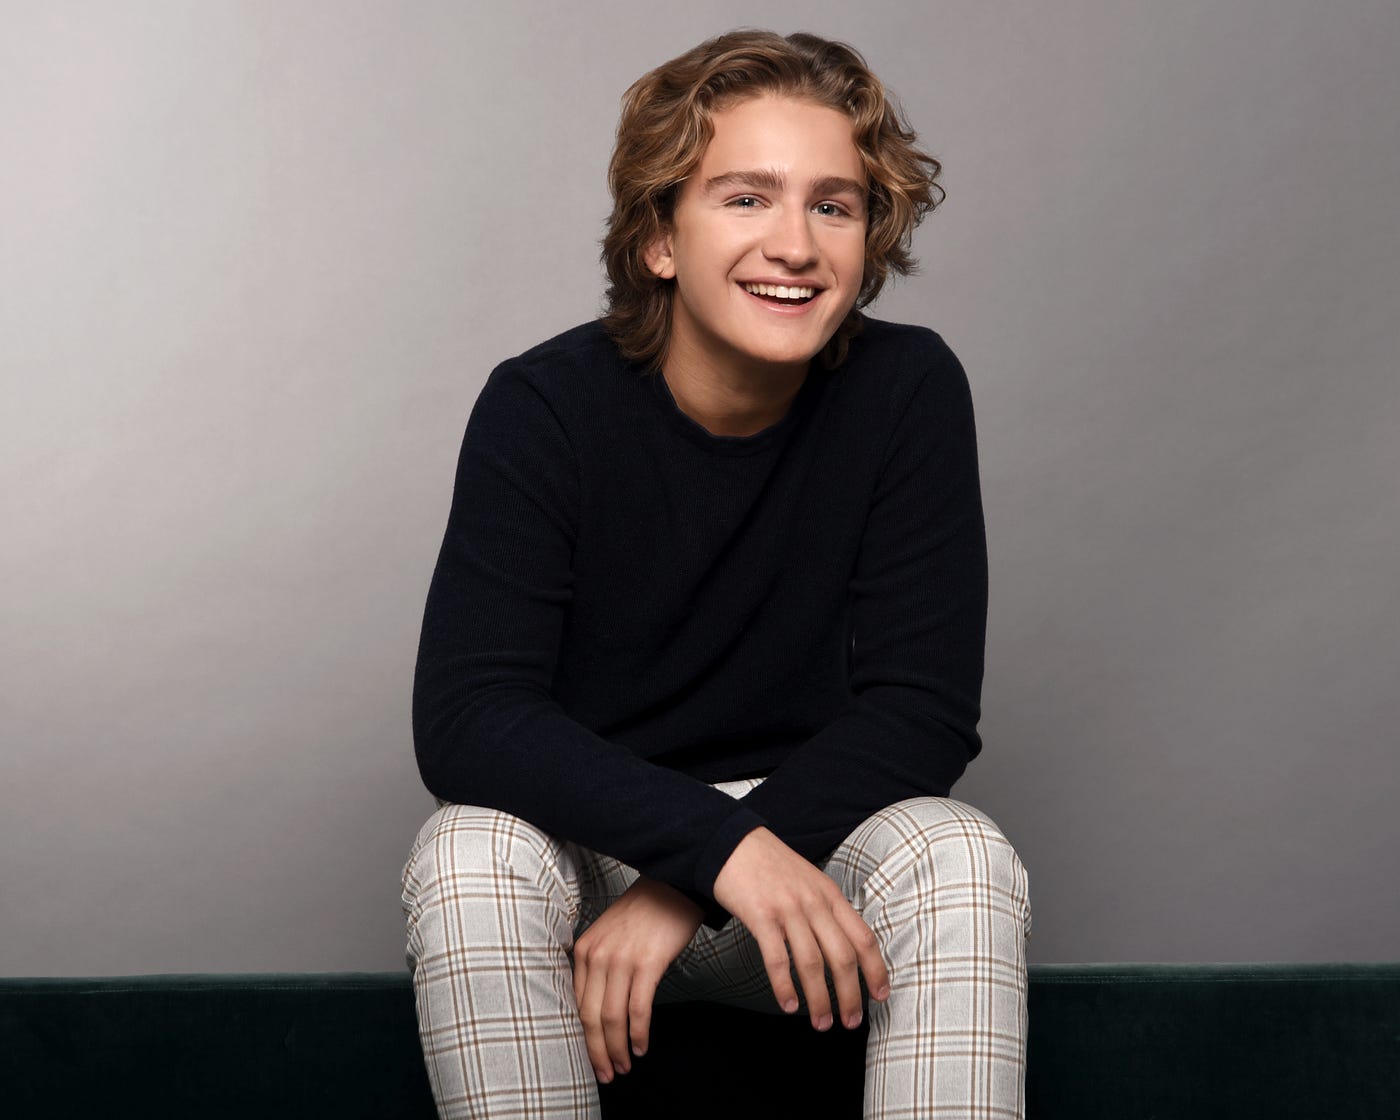 Tait Blum Bio, Parents, Siblings, Girlfriend, Physical Features, Career, Net Worth